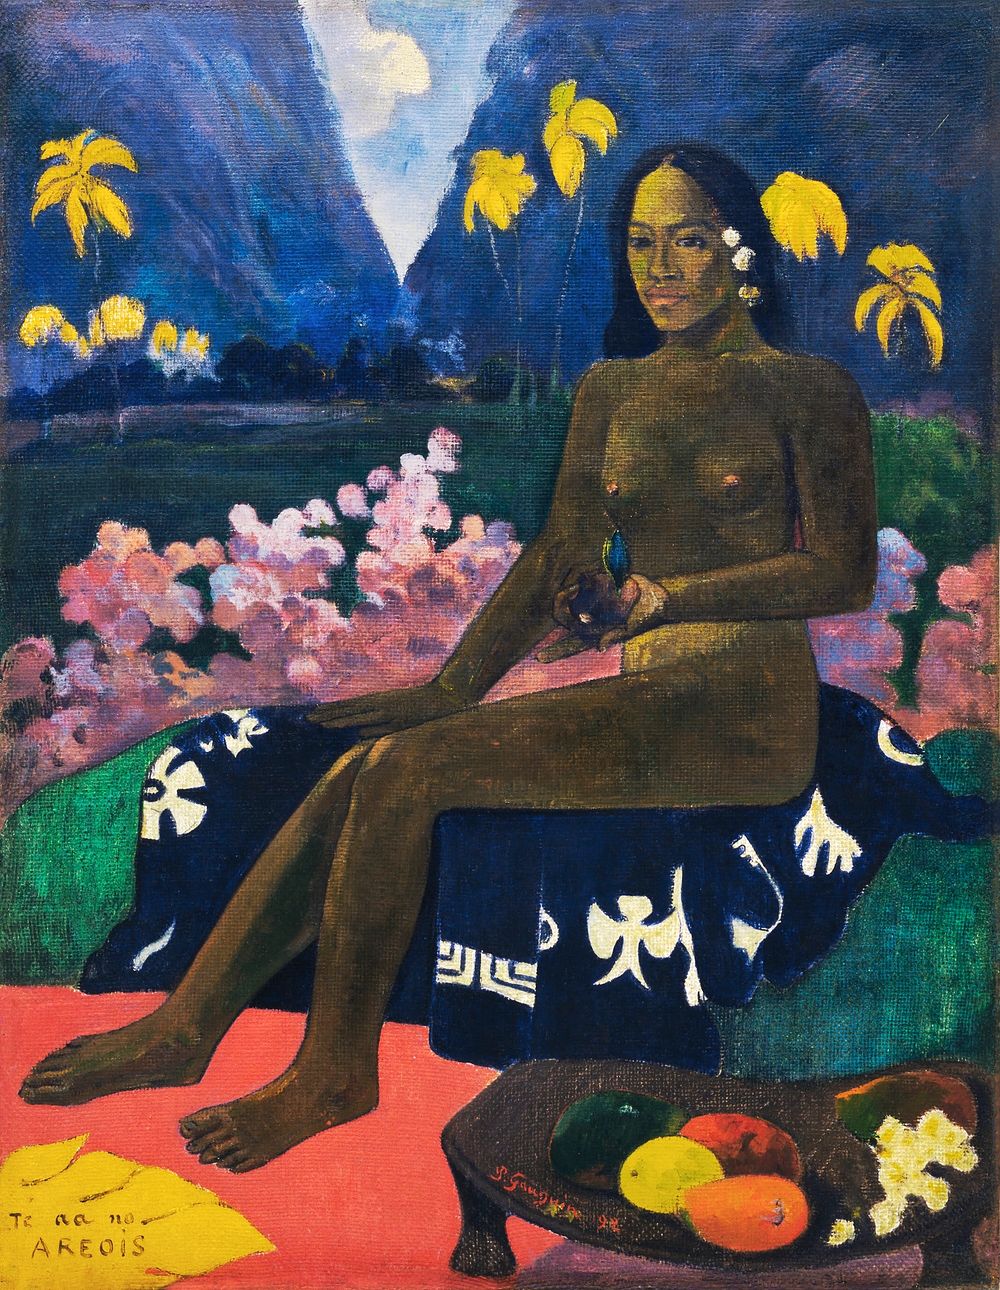 Paul Gauguin's The Seed of the Areoi (1892) famous painting. Original from Wikimedia Commons. Digitally enhanced by rawpixel.